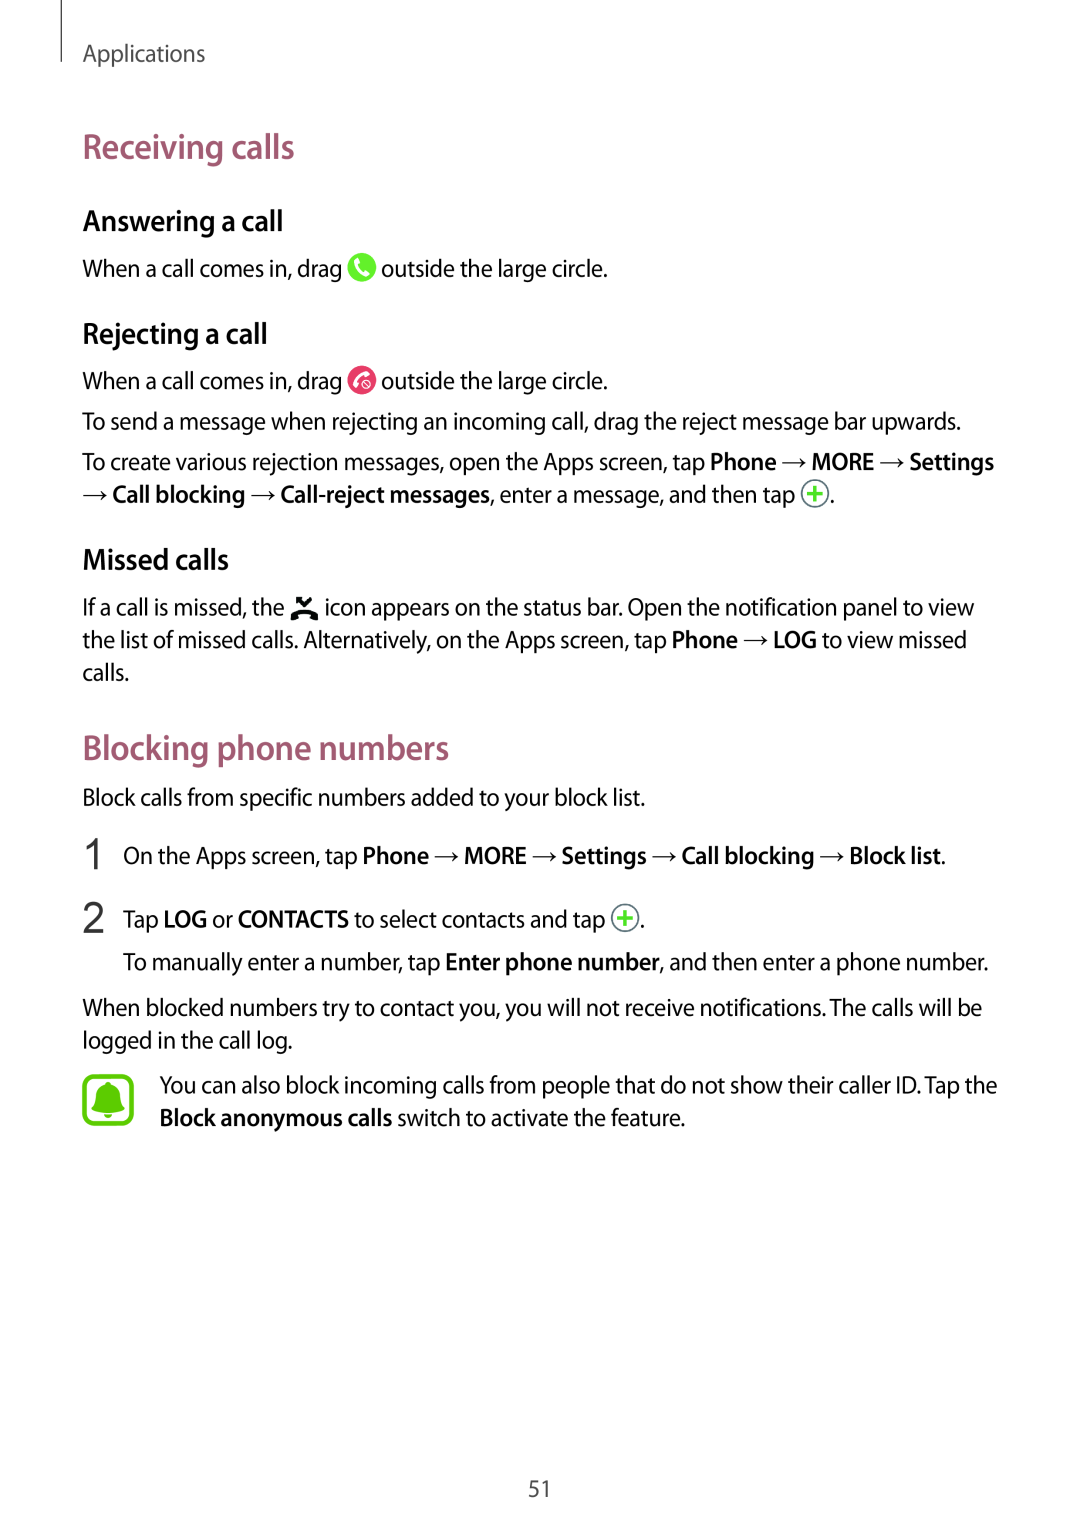 Samsung SM-T719NZWEDBT manual Receiving calls, Blocking phone numbers, Answering a call, Rejecting a call, Missed calls 